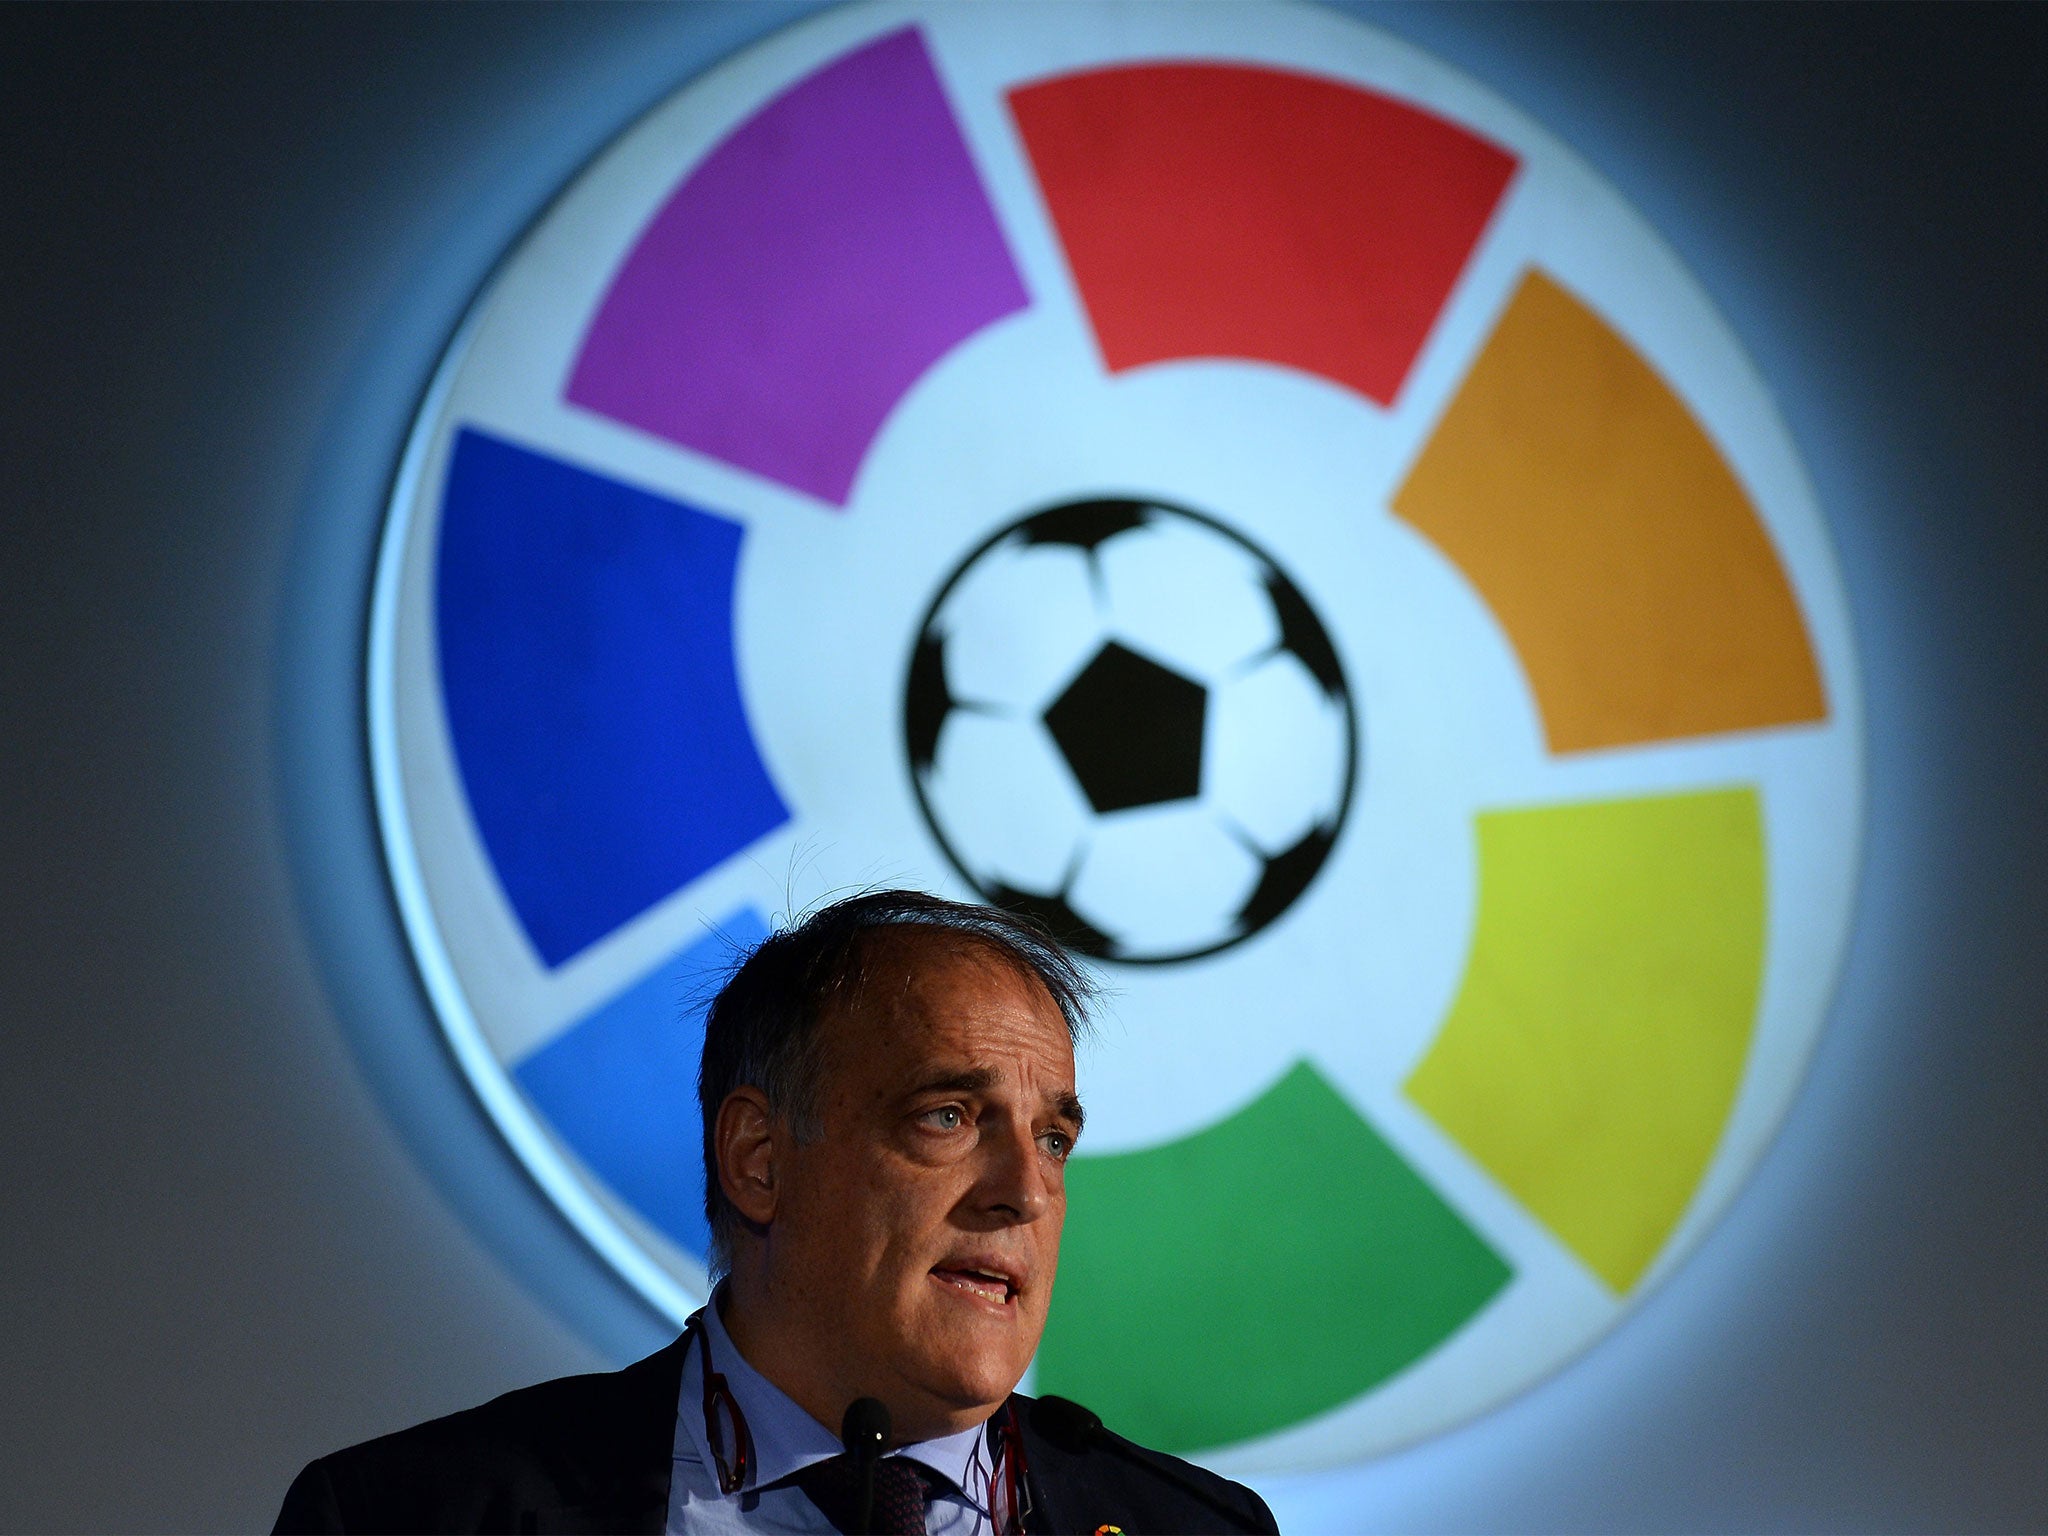 Javier Tebas, La Liga’s president, is trying to spread his league’s appeal